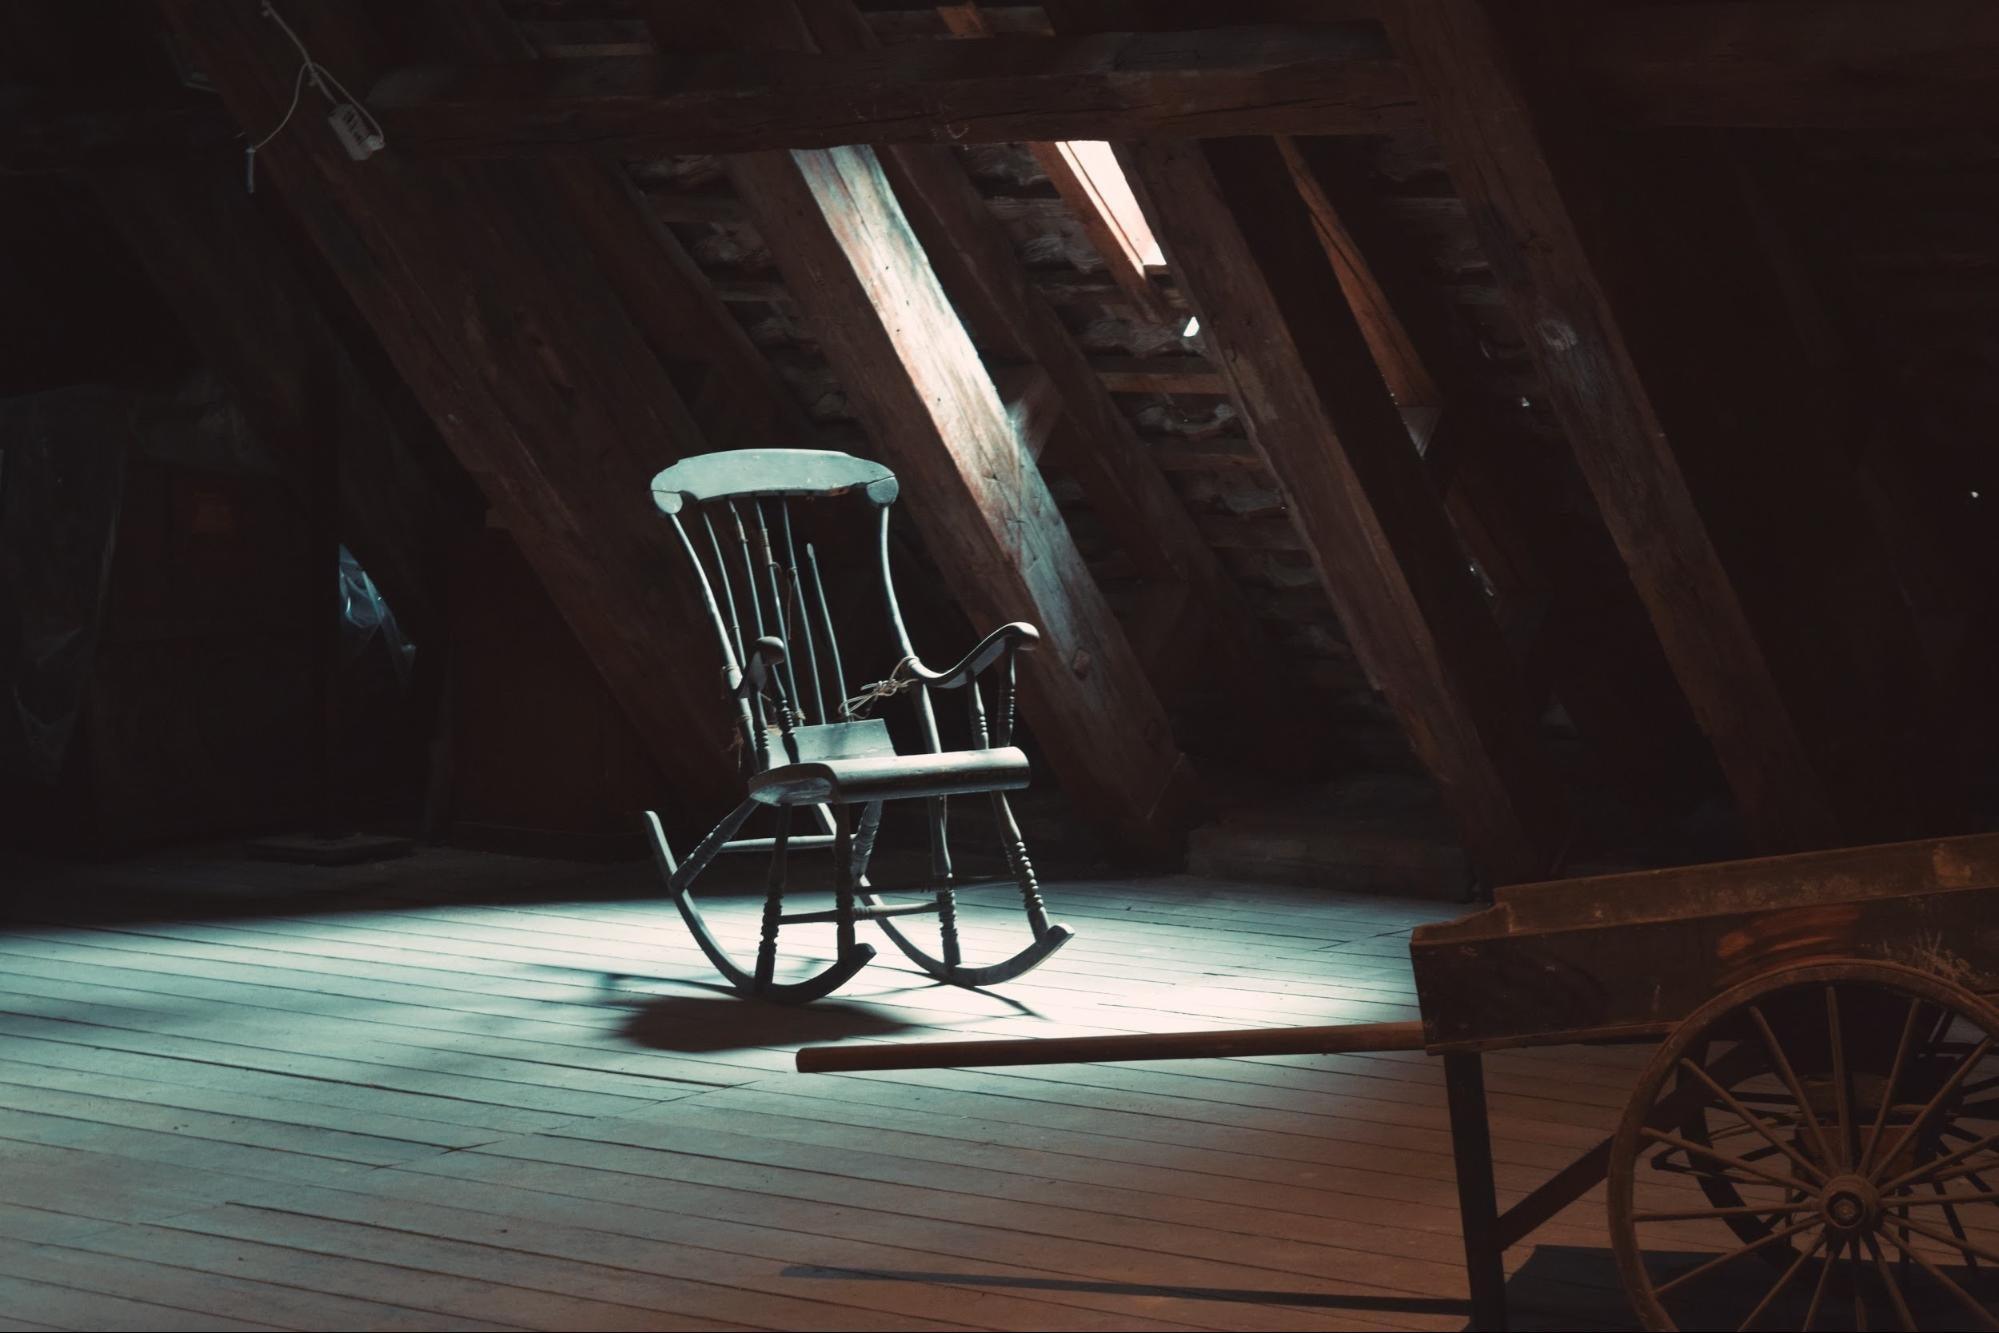 ghastly rocking chair in old attic